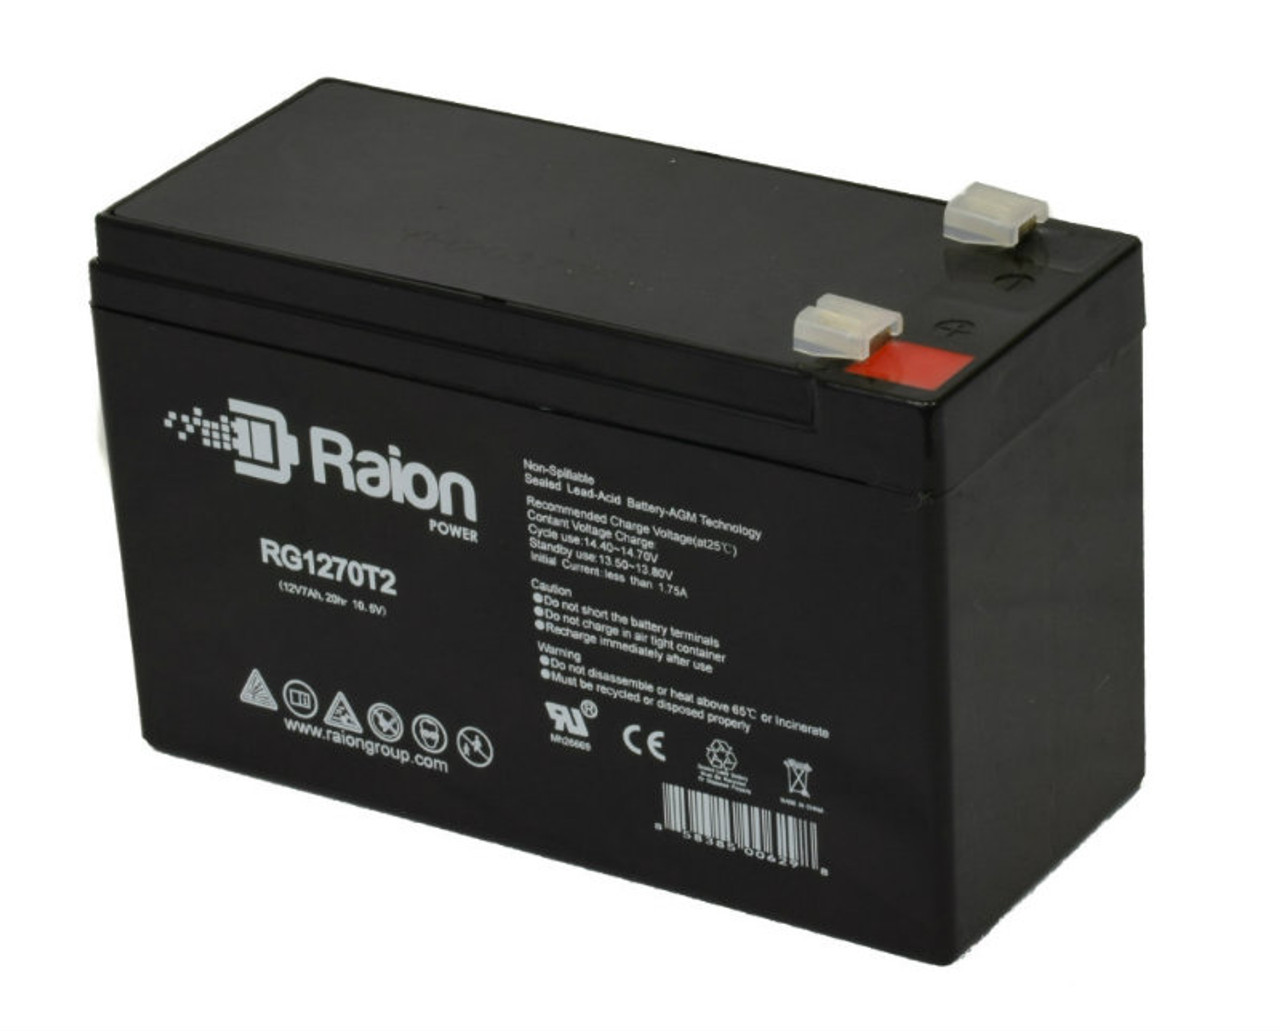 Raion Power RG1270T1 12V 7Ah Non-Spillable Replacement Battery for Leoch DJW12-7.0